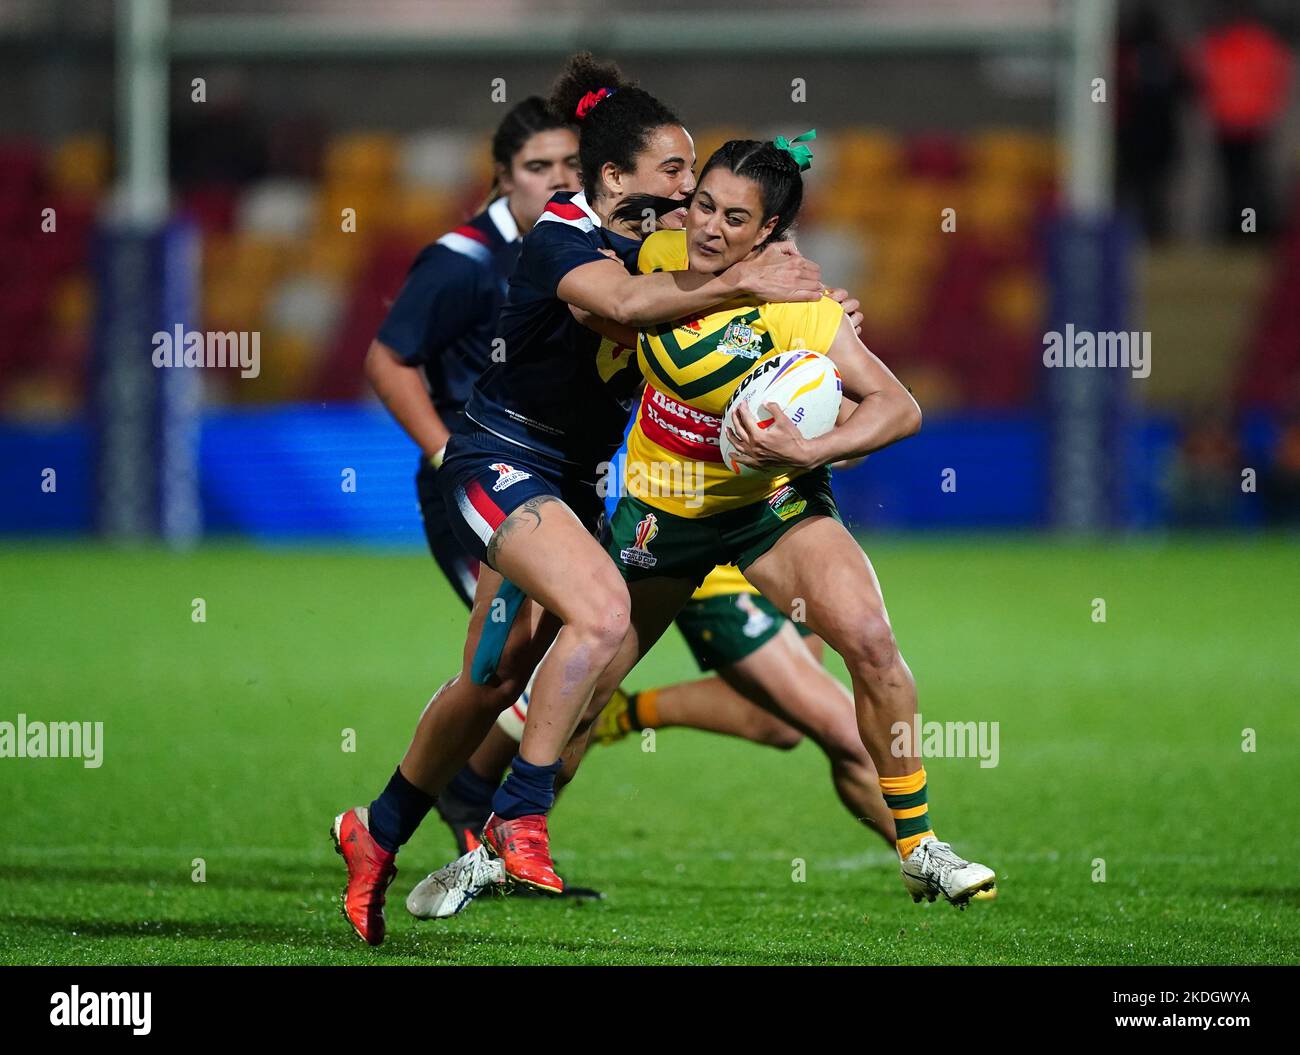 Australia's Yasmin Clydsdale (right) tackled by France's Elisa Ciria during the Women's Rugby League World Cup Group B match at the LNER Community Stadium, York. Picture date: Sunday November 6, 2022. Stock Photo